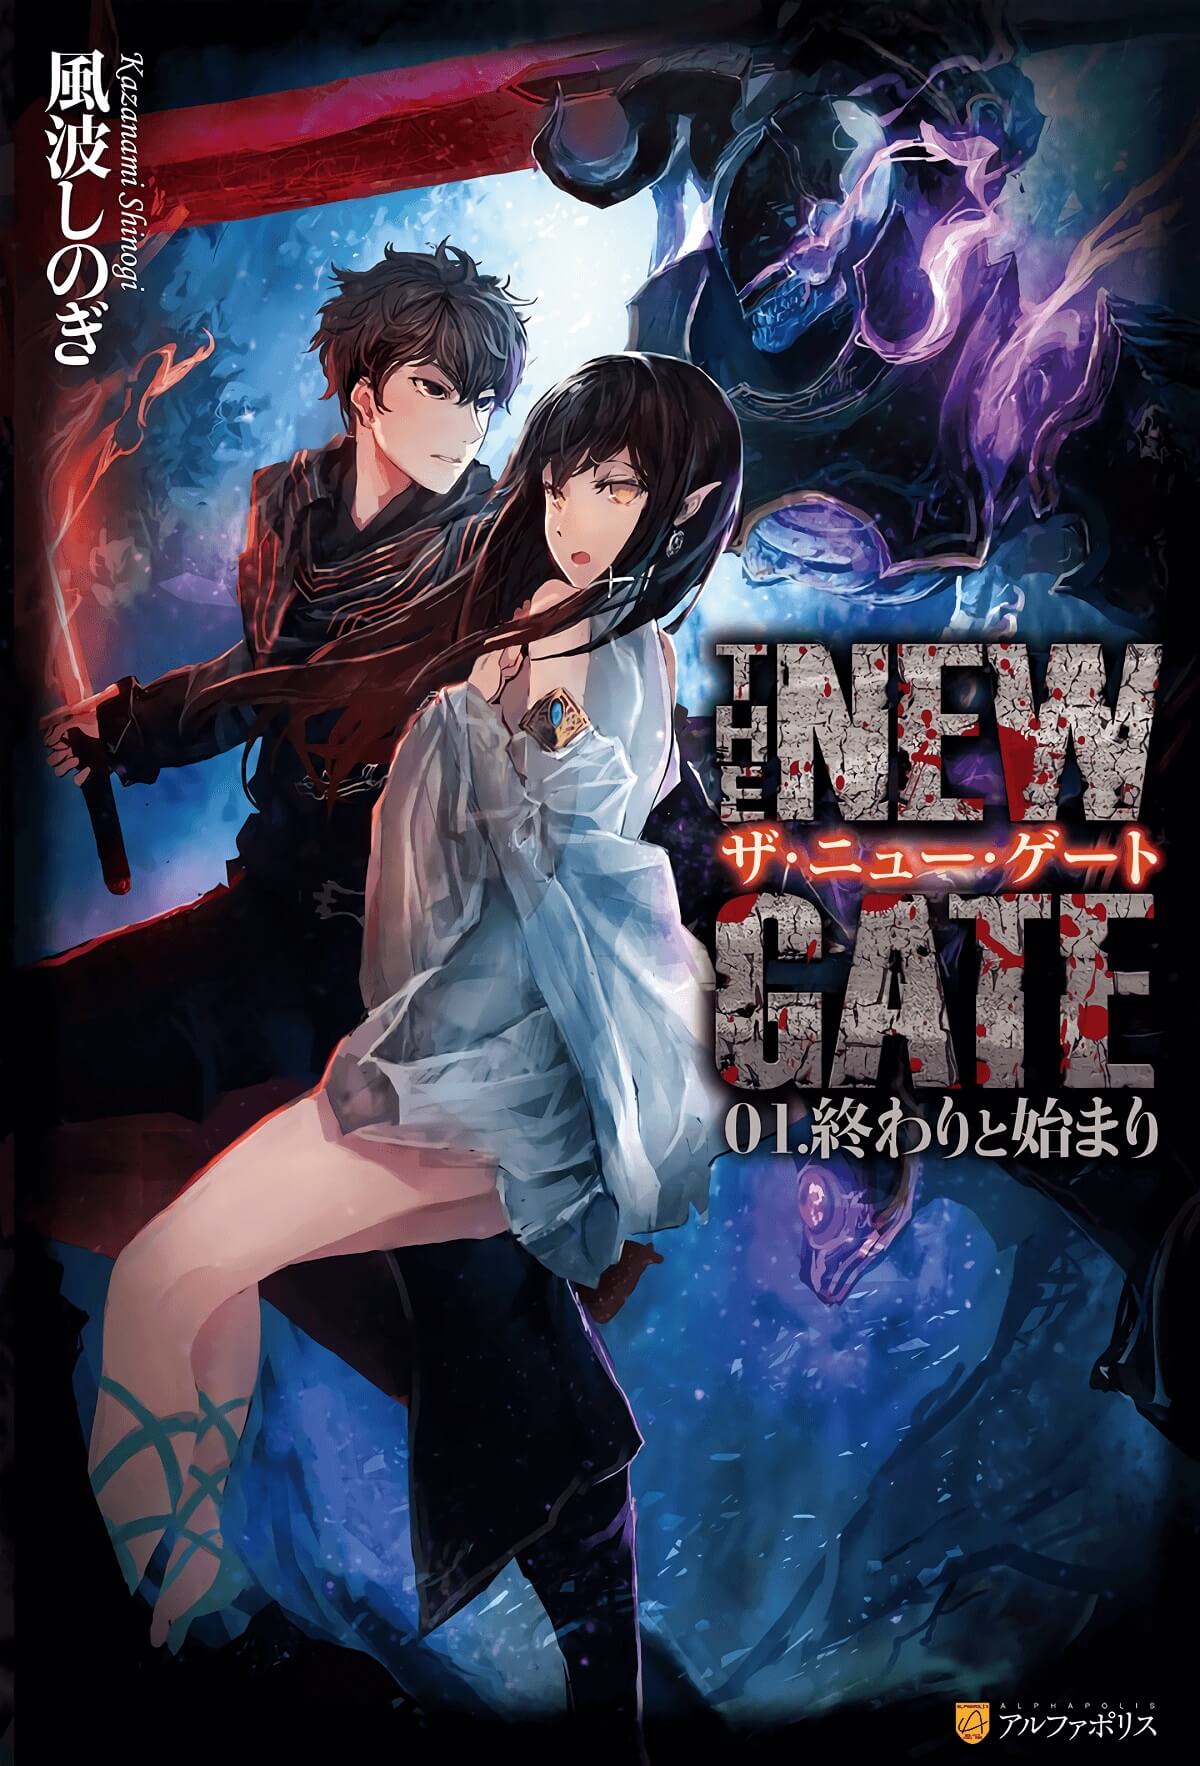 The New Gate Vol. 7 Chapter 3 Part 3 – Thanks to Shin Translations!